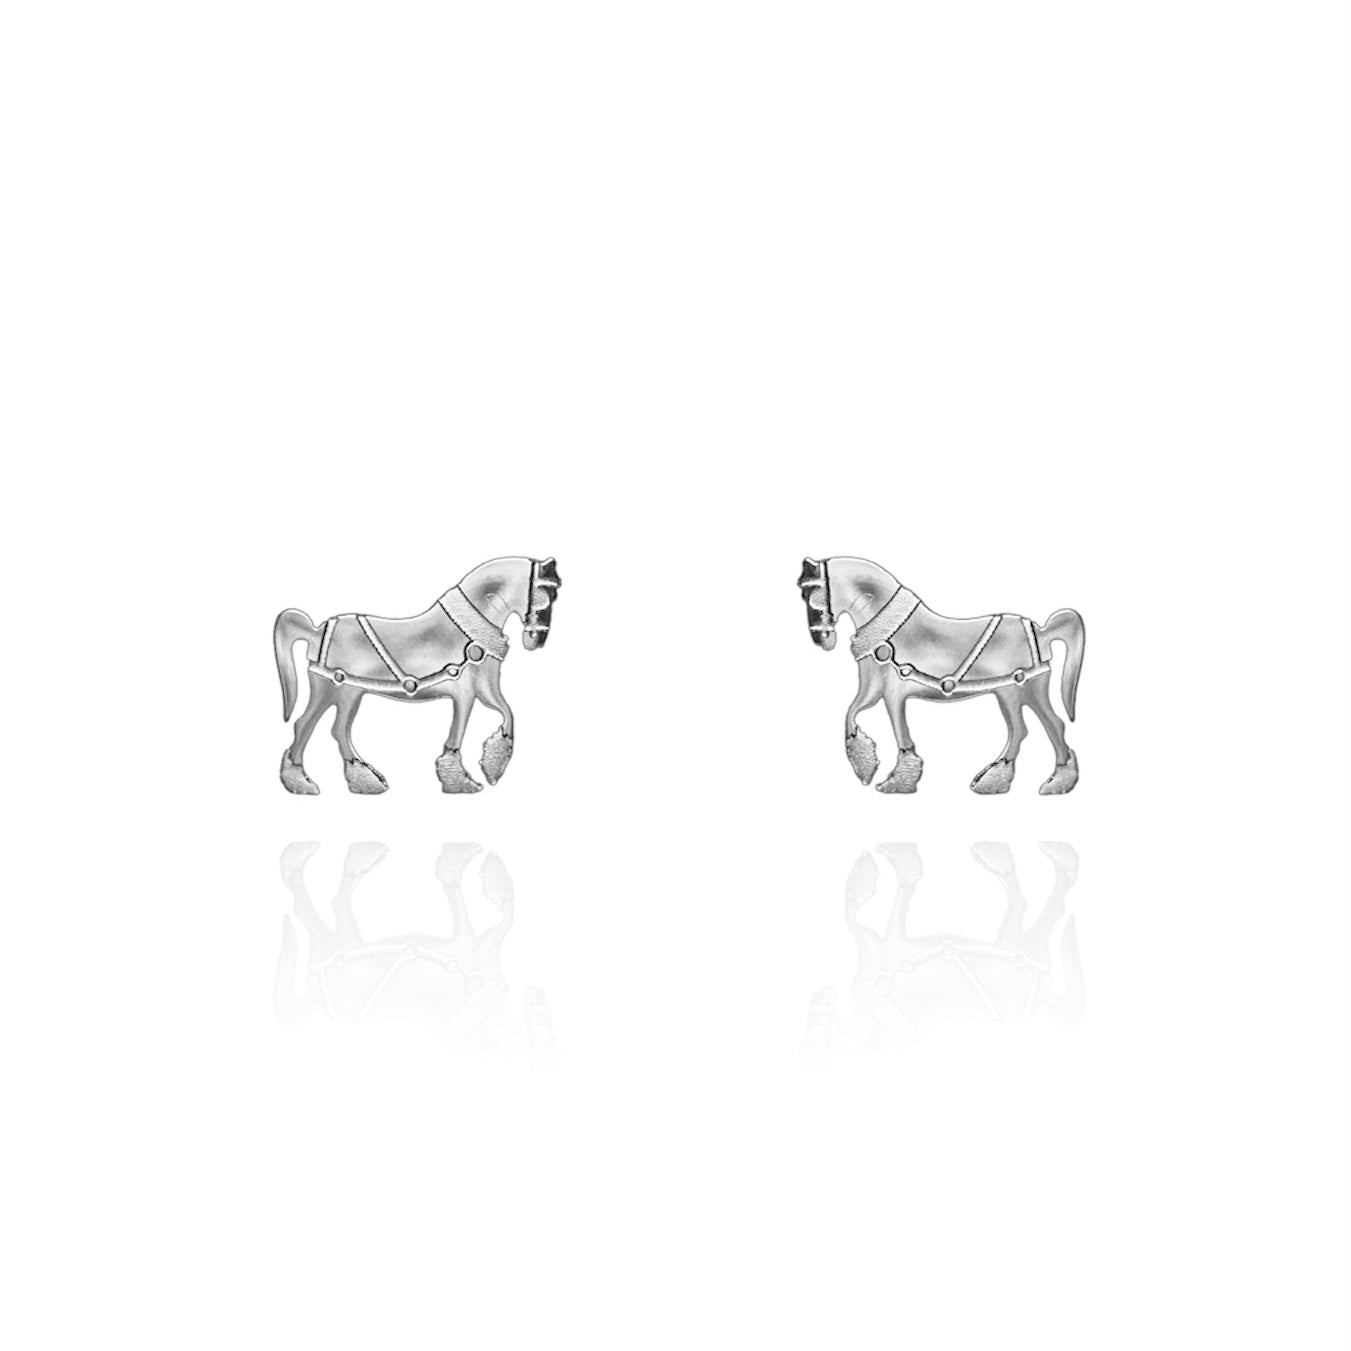 Clydesdale Horse Earring Studs Silver